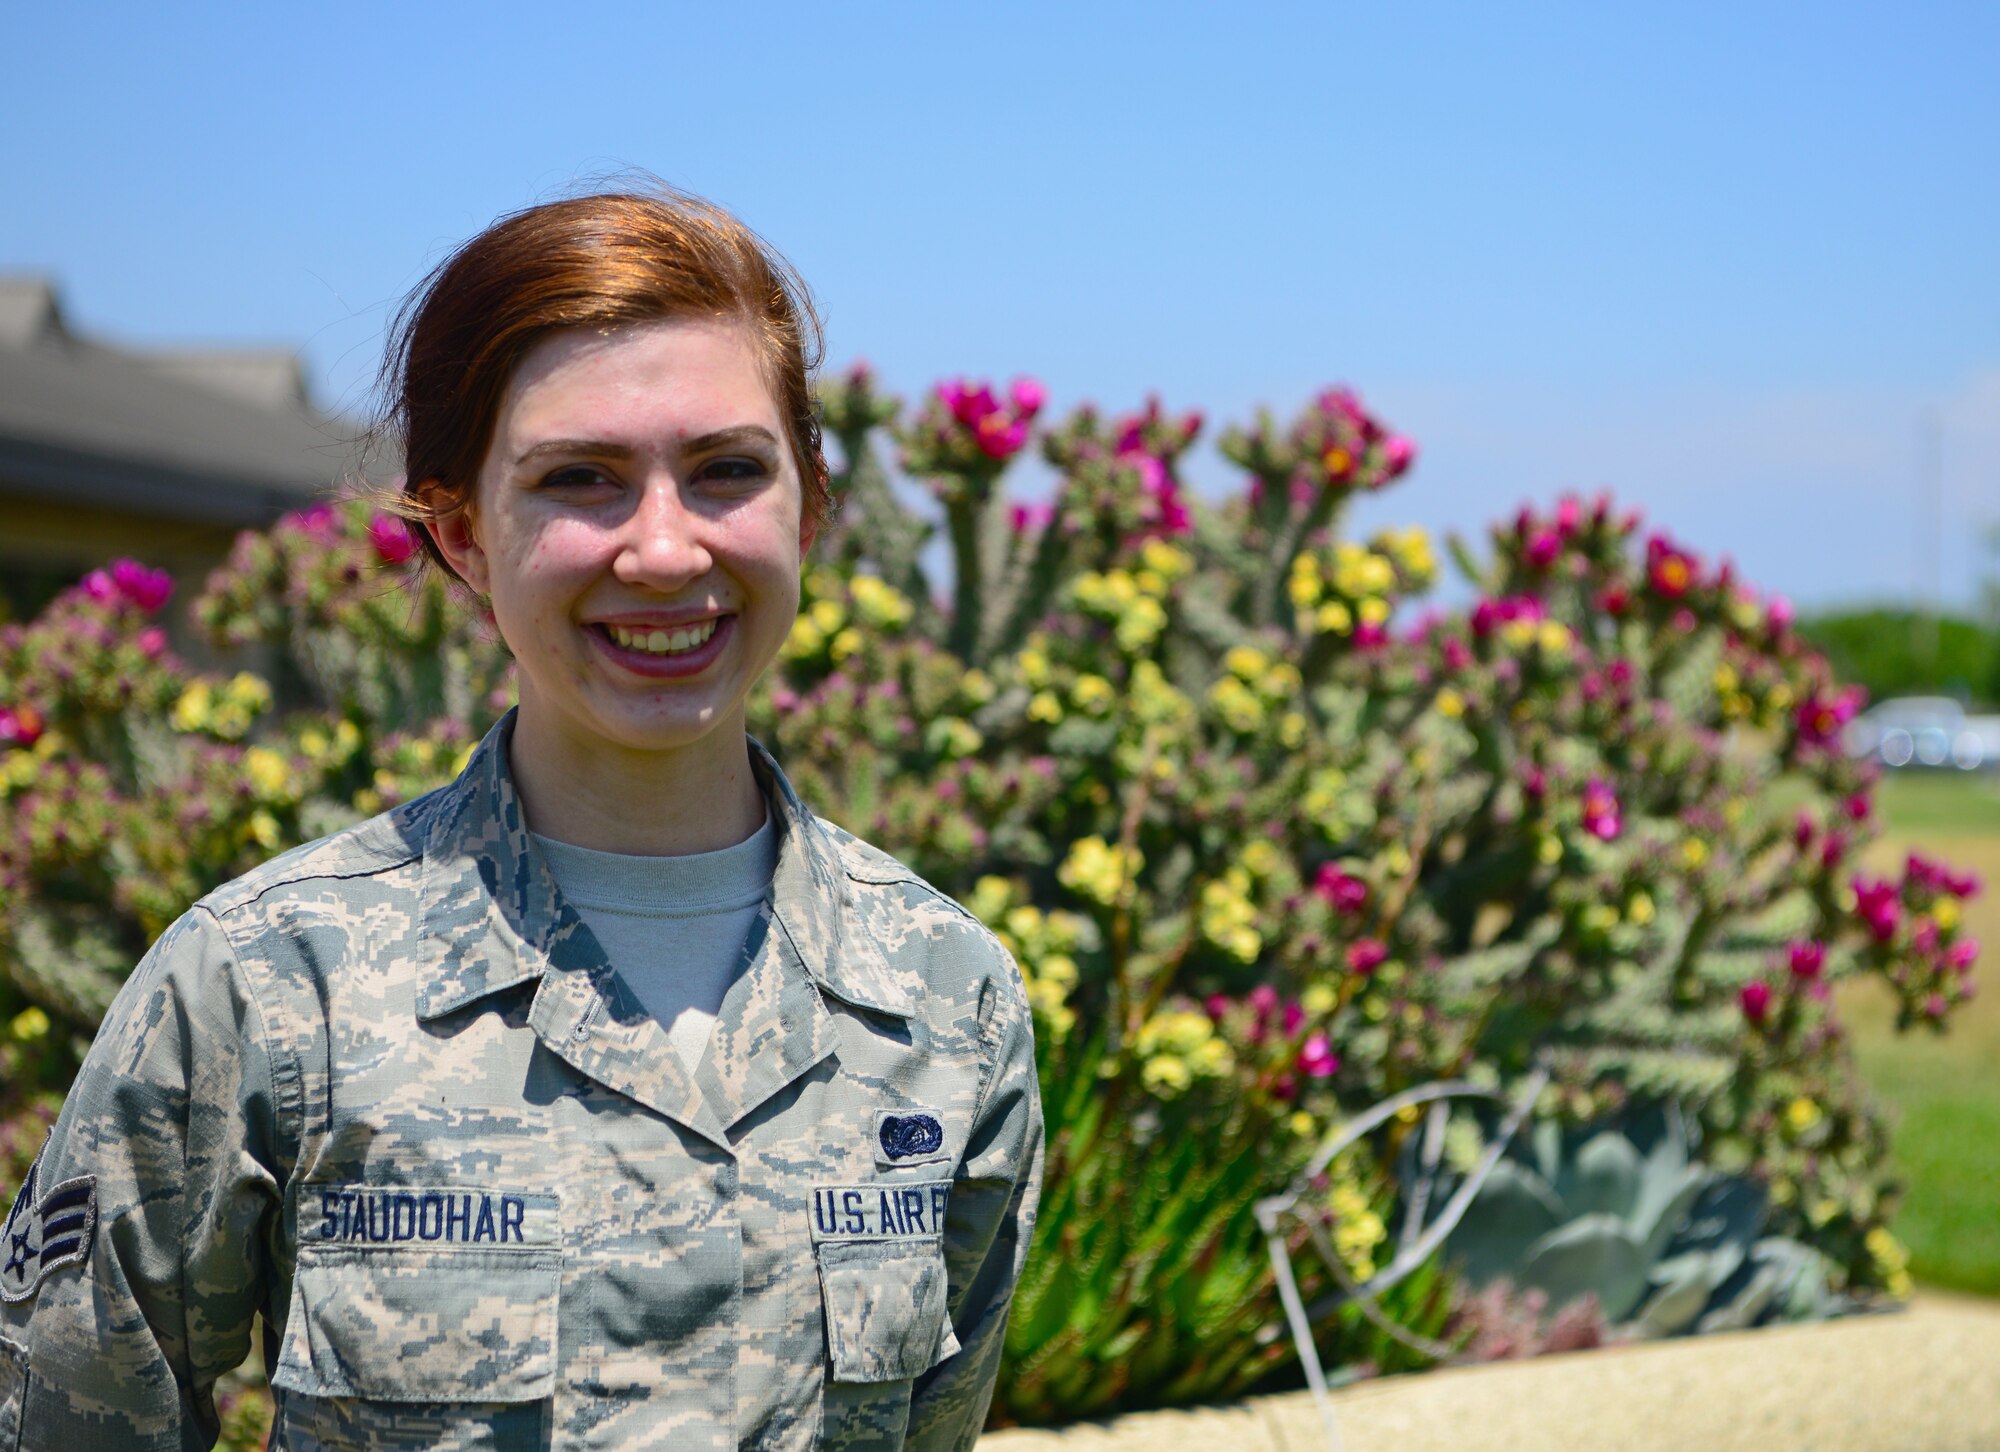 Senior Airman Jade Staudohar, 9th Comptroller Squadron commander support staff poses for a photo